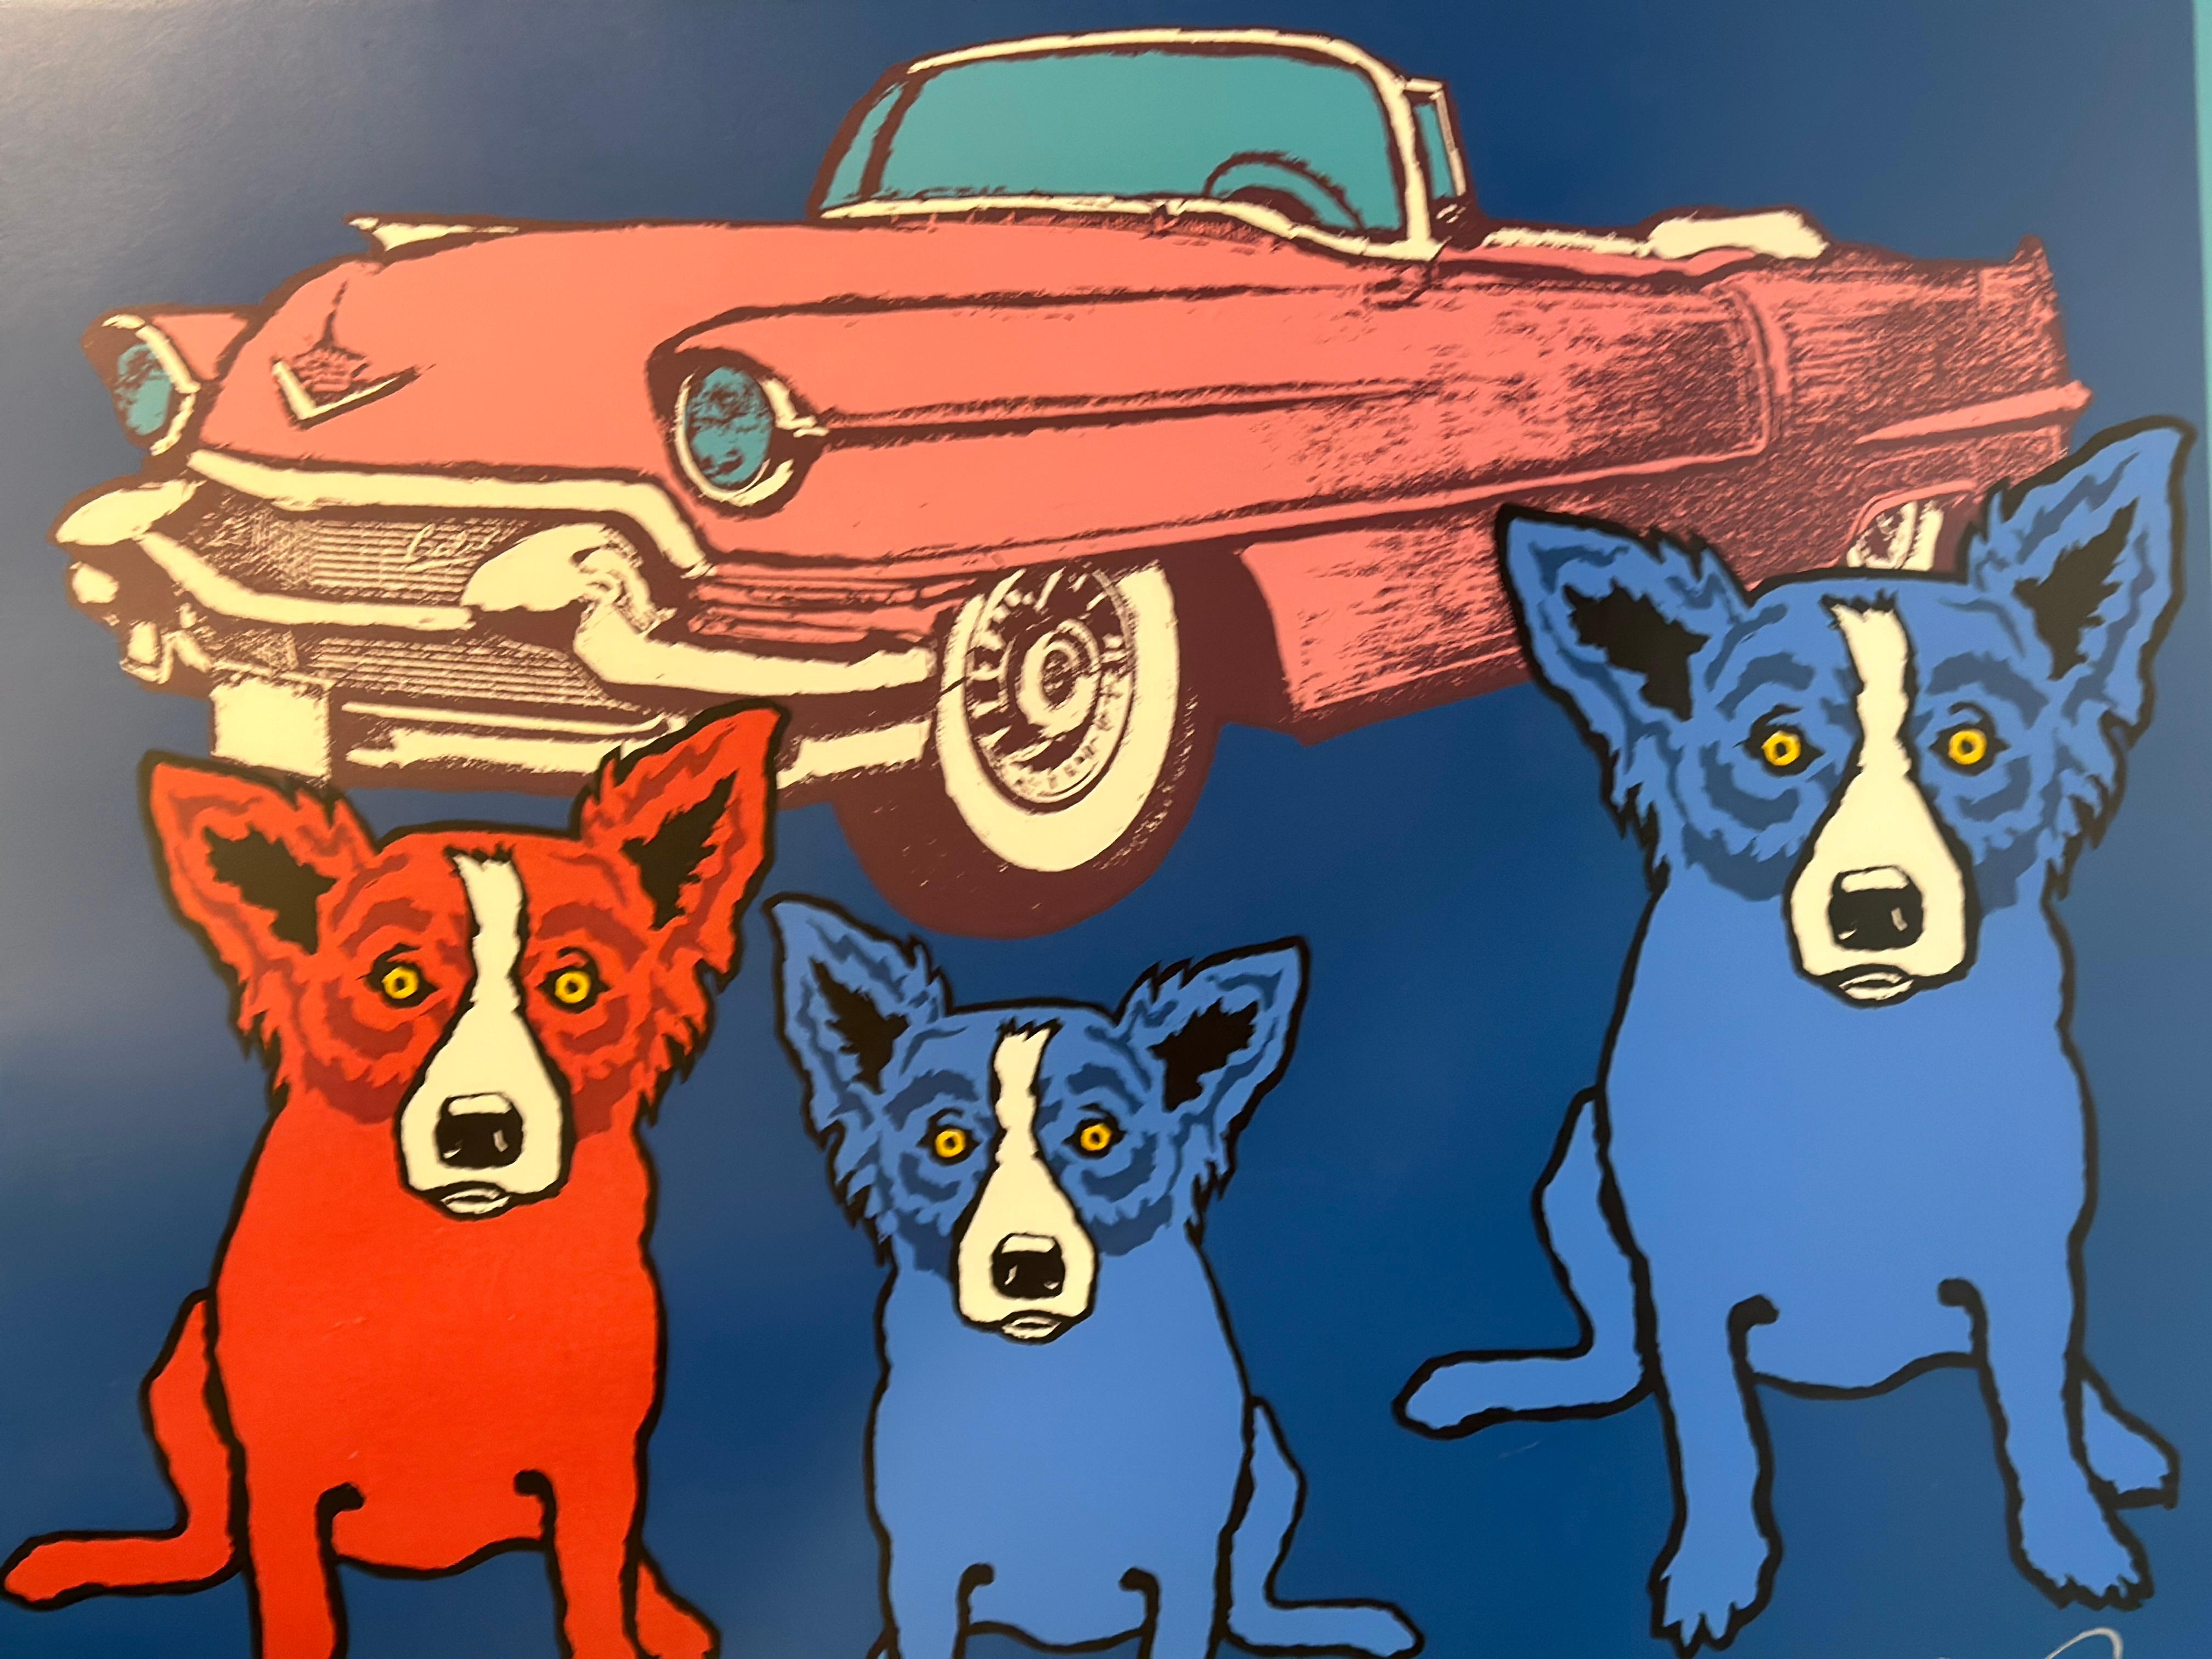 “The Devil in Me” (1991) 22x28, 31x37 framed as is.

Among the first ever Blue Dogs, this early important original silkscreen is among the artist’s most treasured, valued, and iconic images. The pink Cadillac, an ode to Elvis Presley, is an iconic